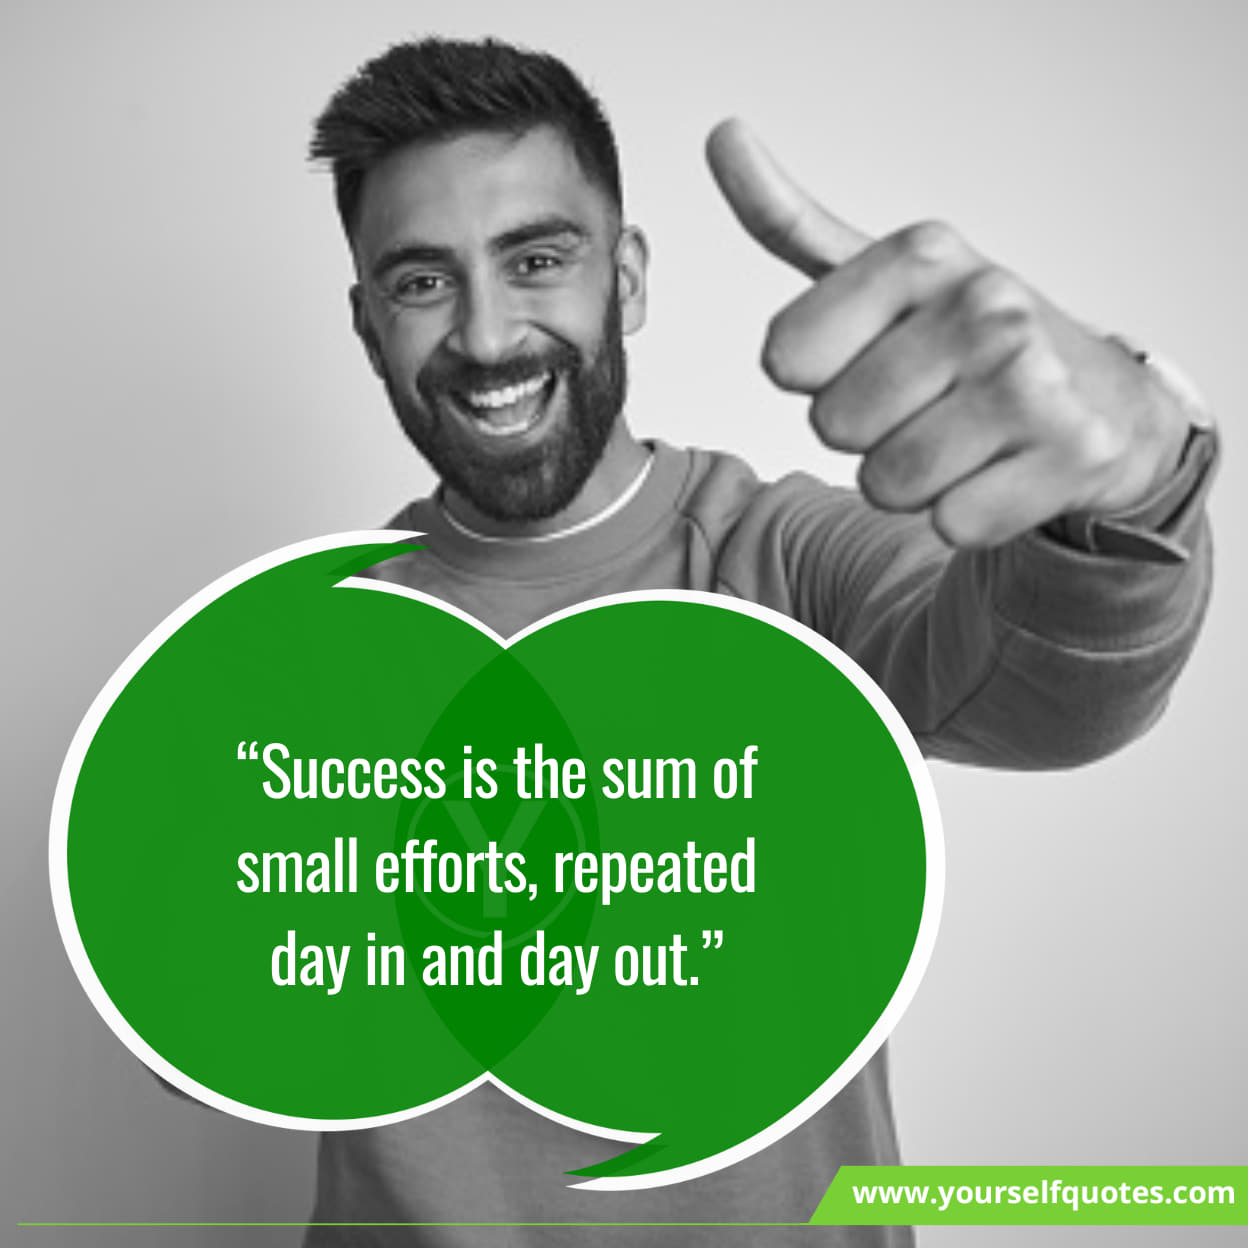 Encouraging Quotes To Be Successful 